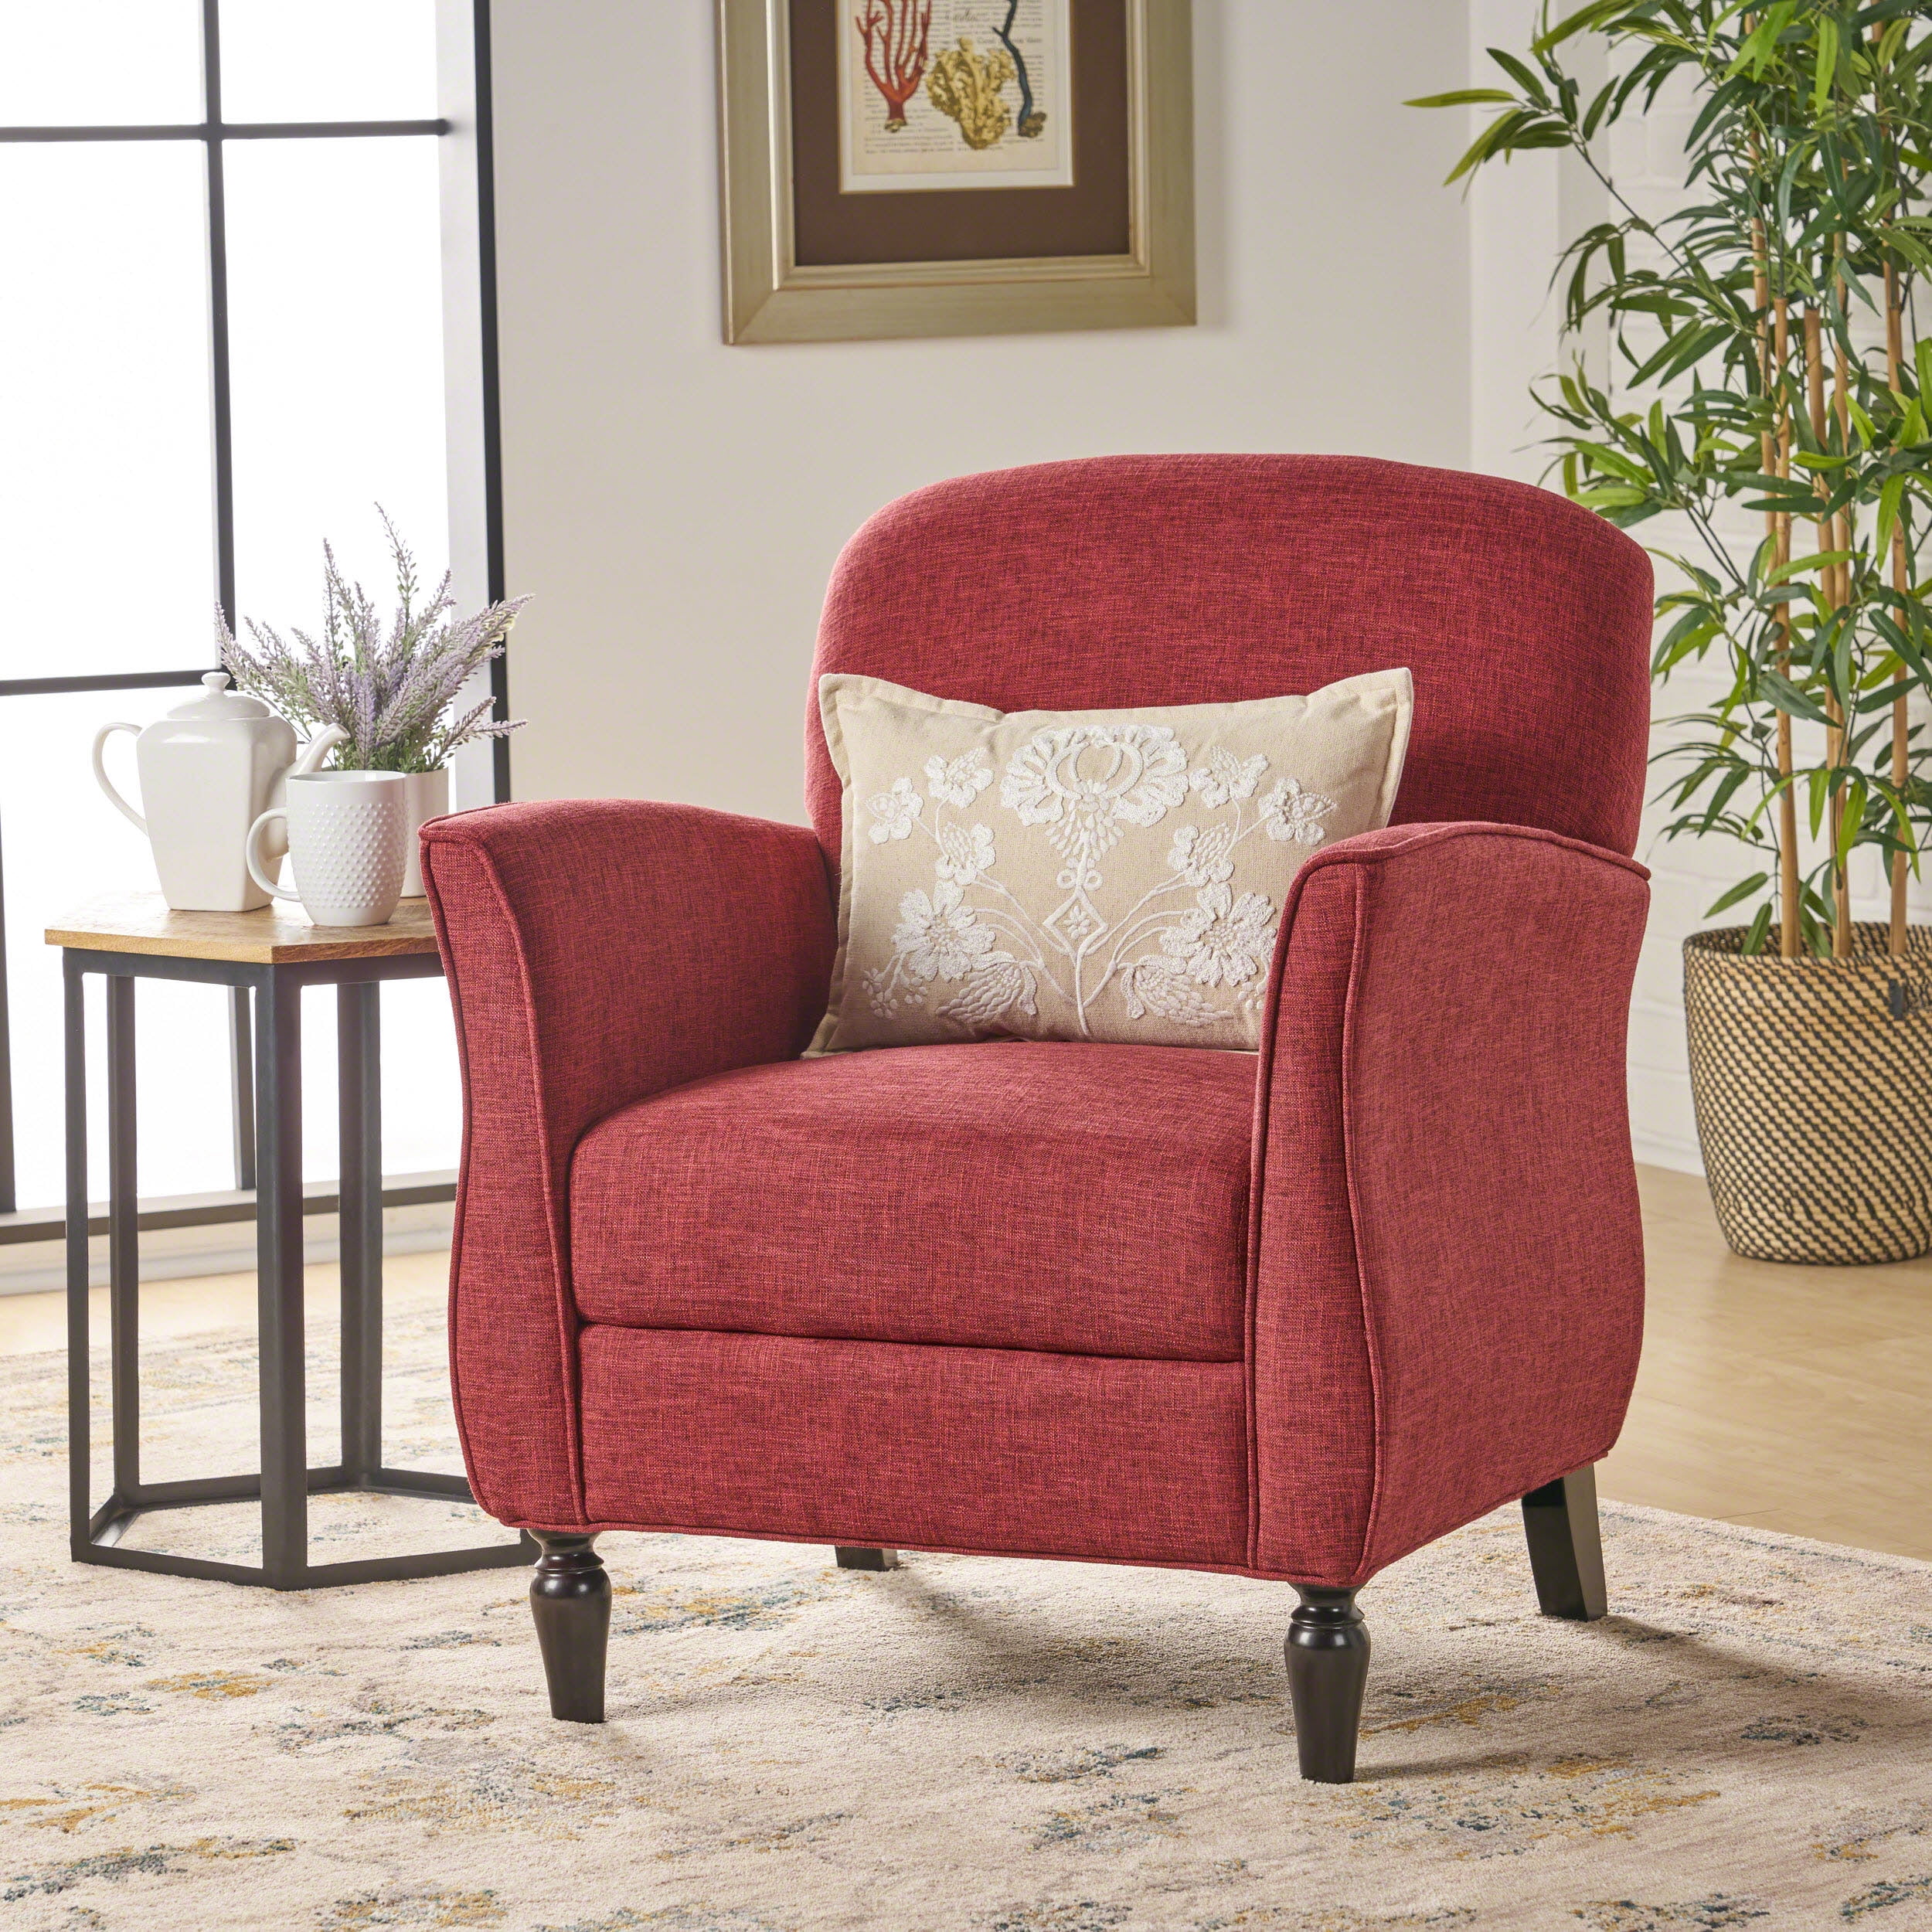 A Real Steal! Berry Red Velvet Designer Chair Lumbar Pillow by